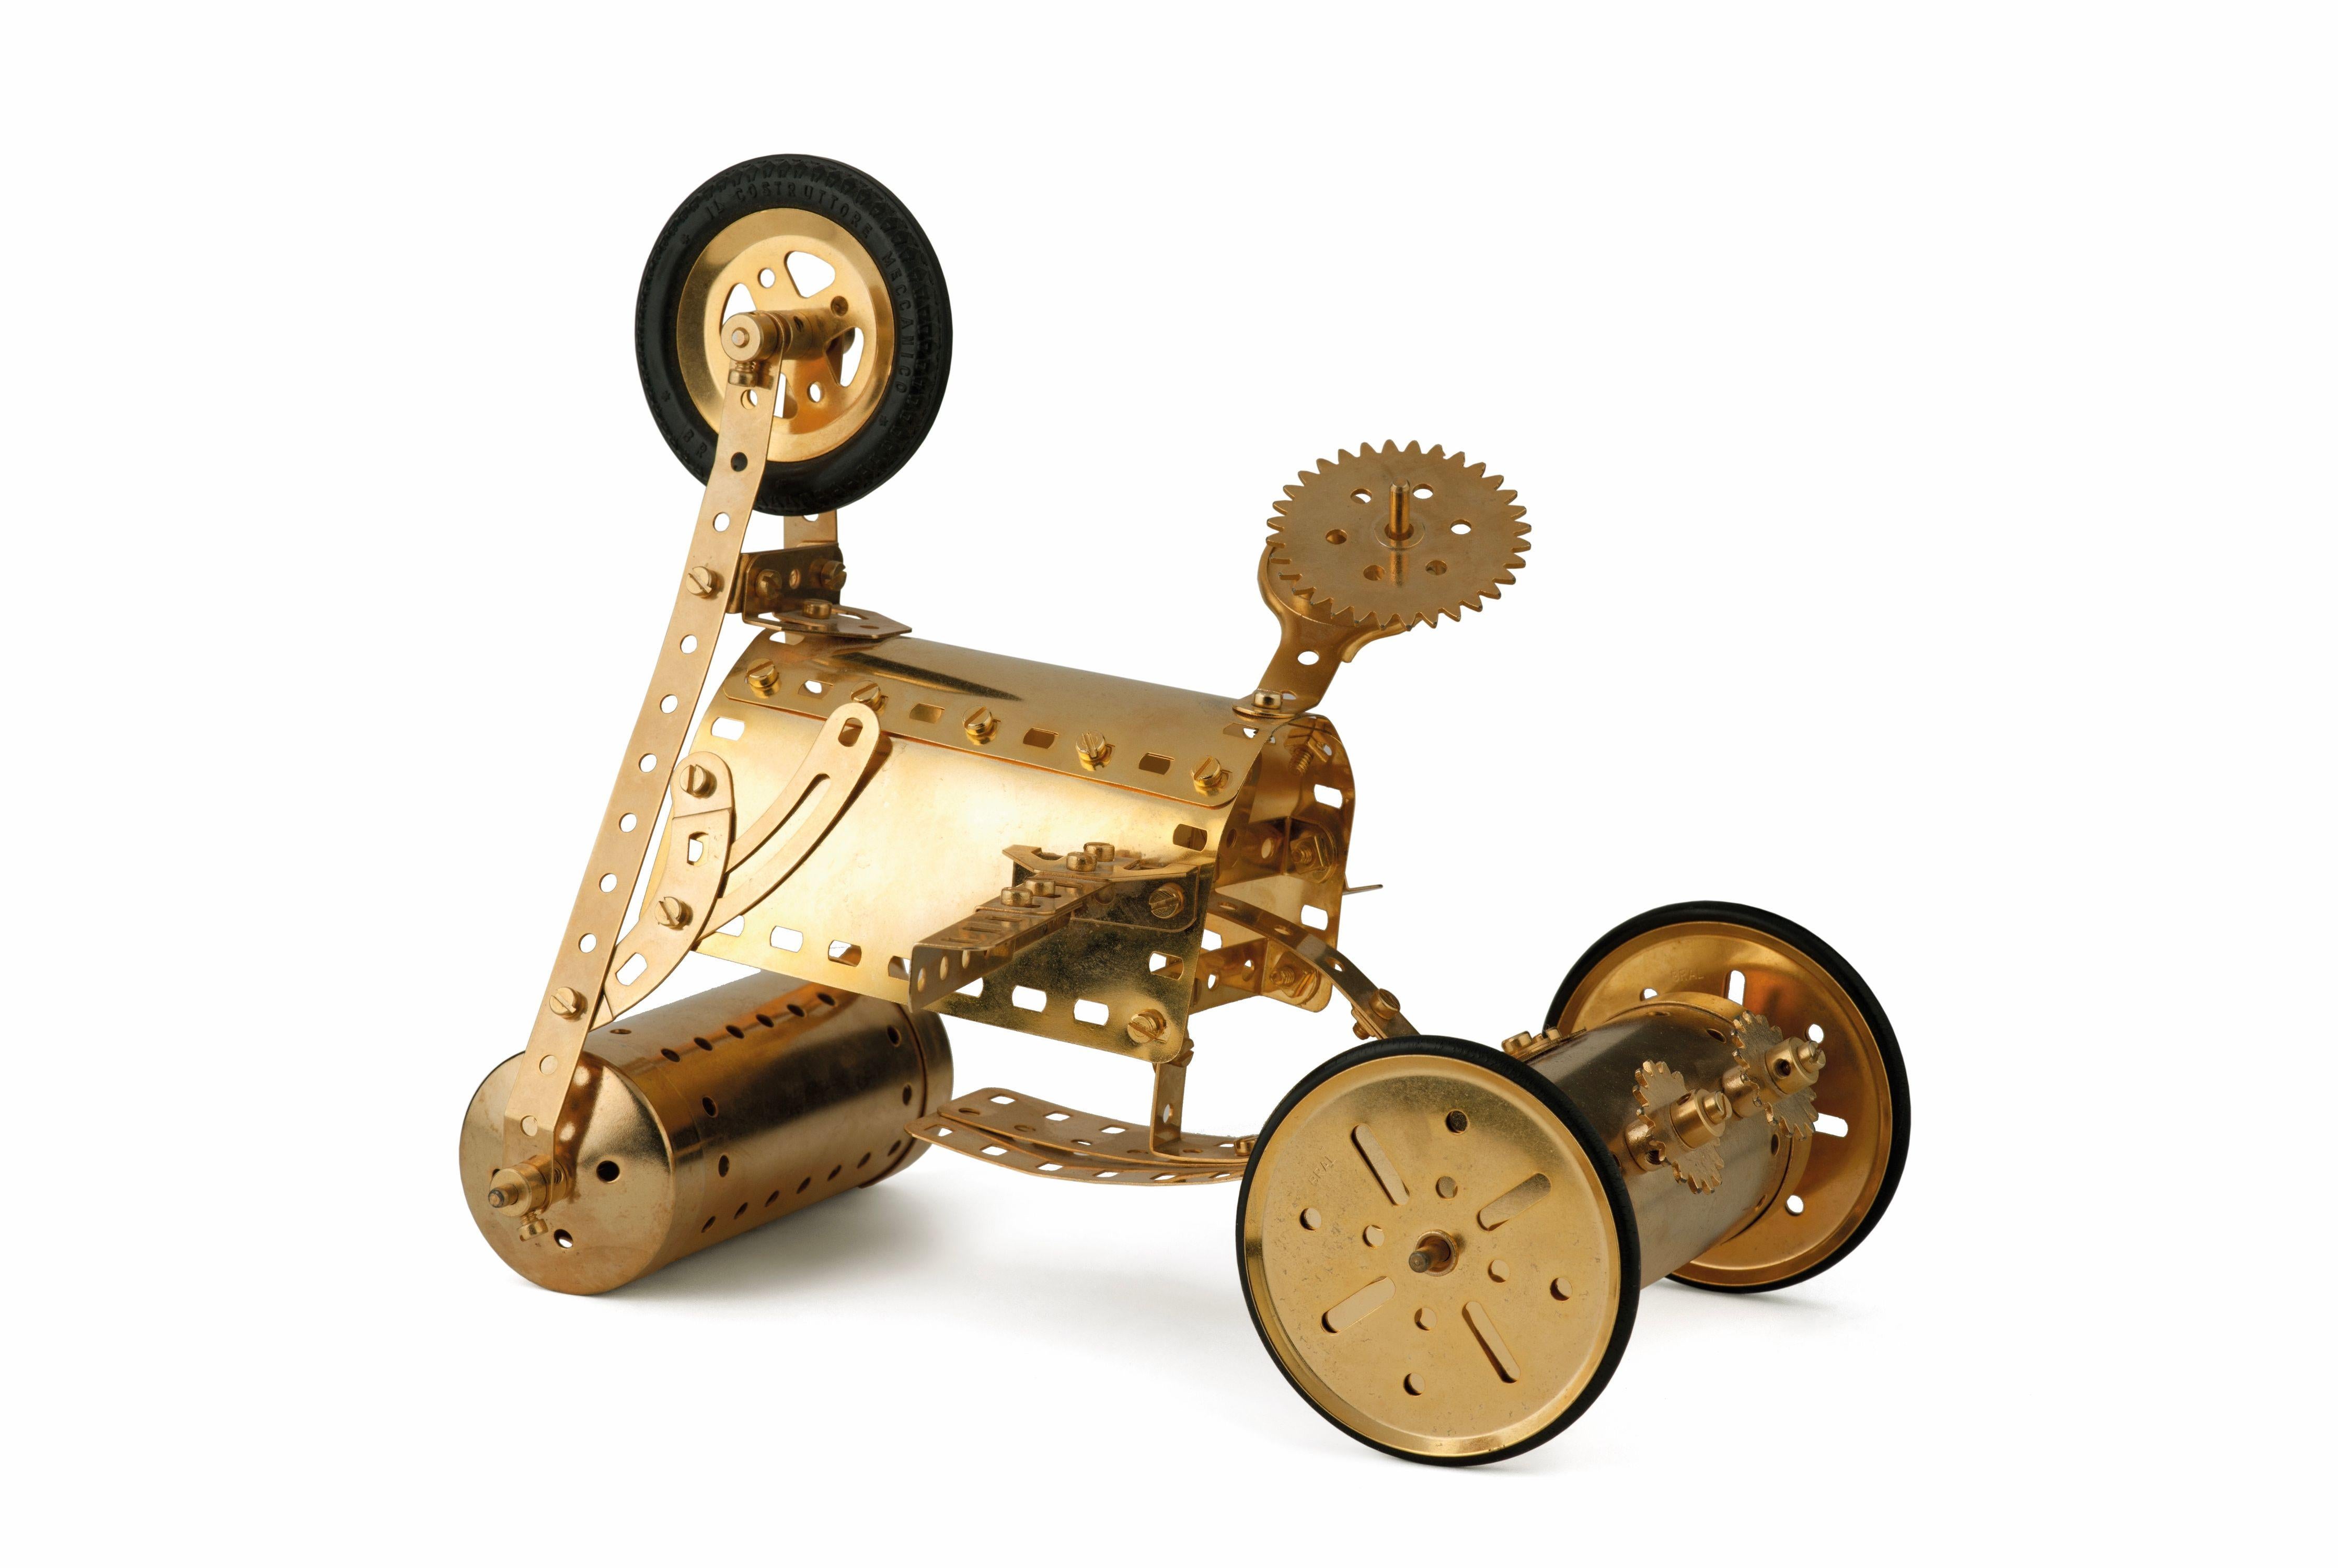 The golden Roll-Dragster - Sculpture by Enrico Baj